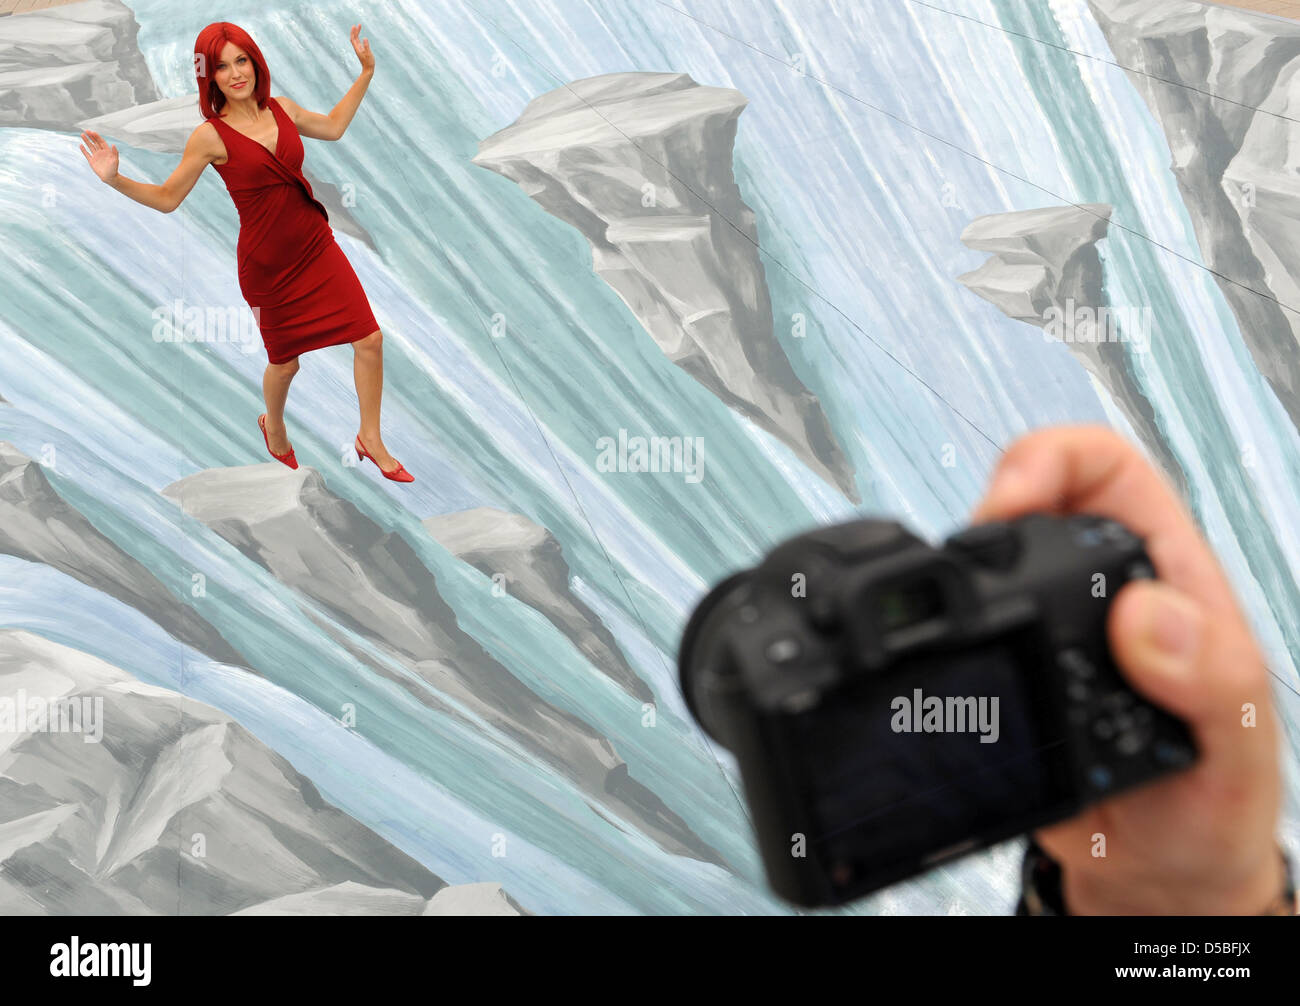 'Miss IFA' jumps from stone to stone in a 'waterfall' of the IFA fairground in Berlin, Germany, 1 September 2010. The extensive painting belongs to an installation that porovides a test area for 3D cameras. Organizers of the fair promise more new products than ever before  for the 50th edition of the IFA that takes place between 3-8 September 2010. According to the fair, more than  Stock Photo